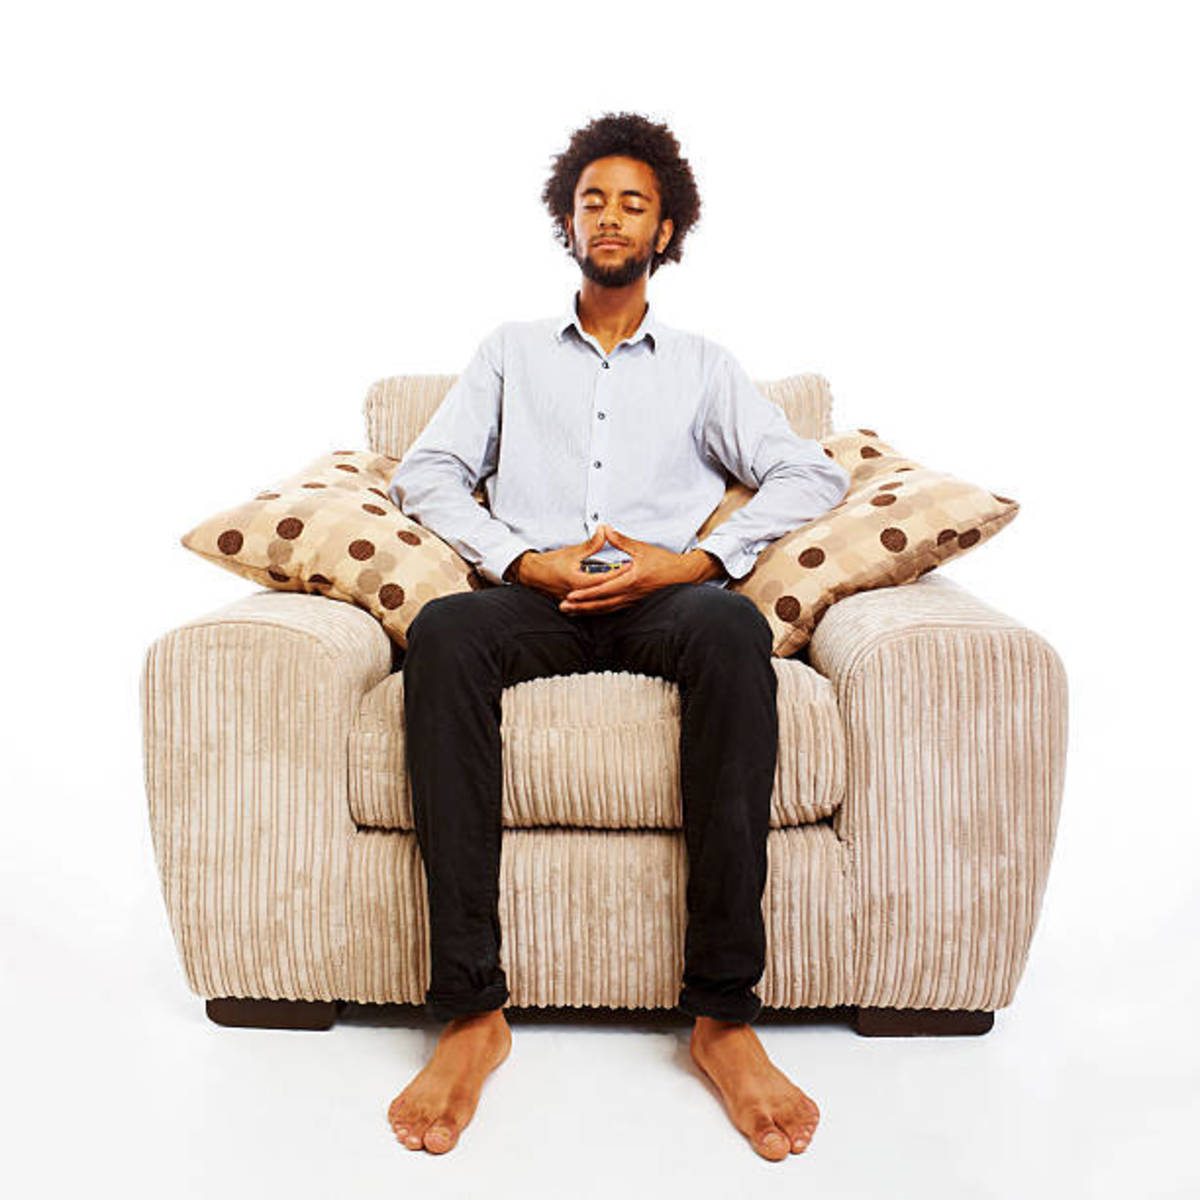 can-i-meditate-in-a-chair-or-lying-down-instead-of-cross-legged-on-the-floor